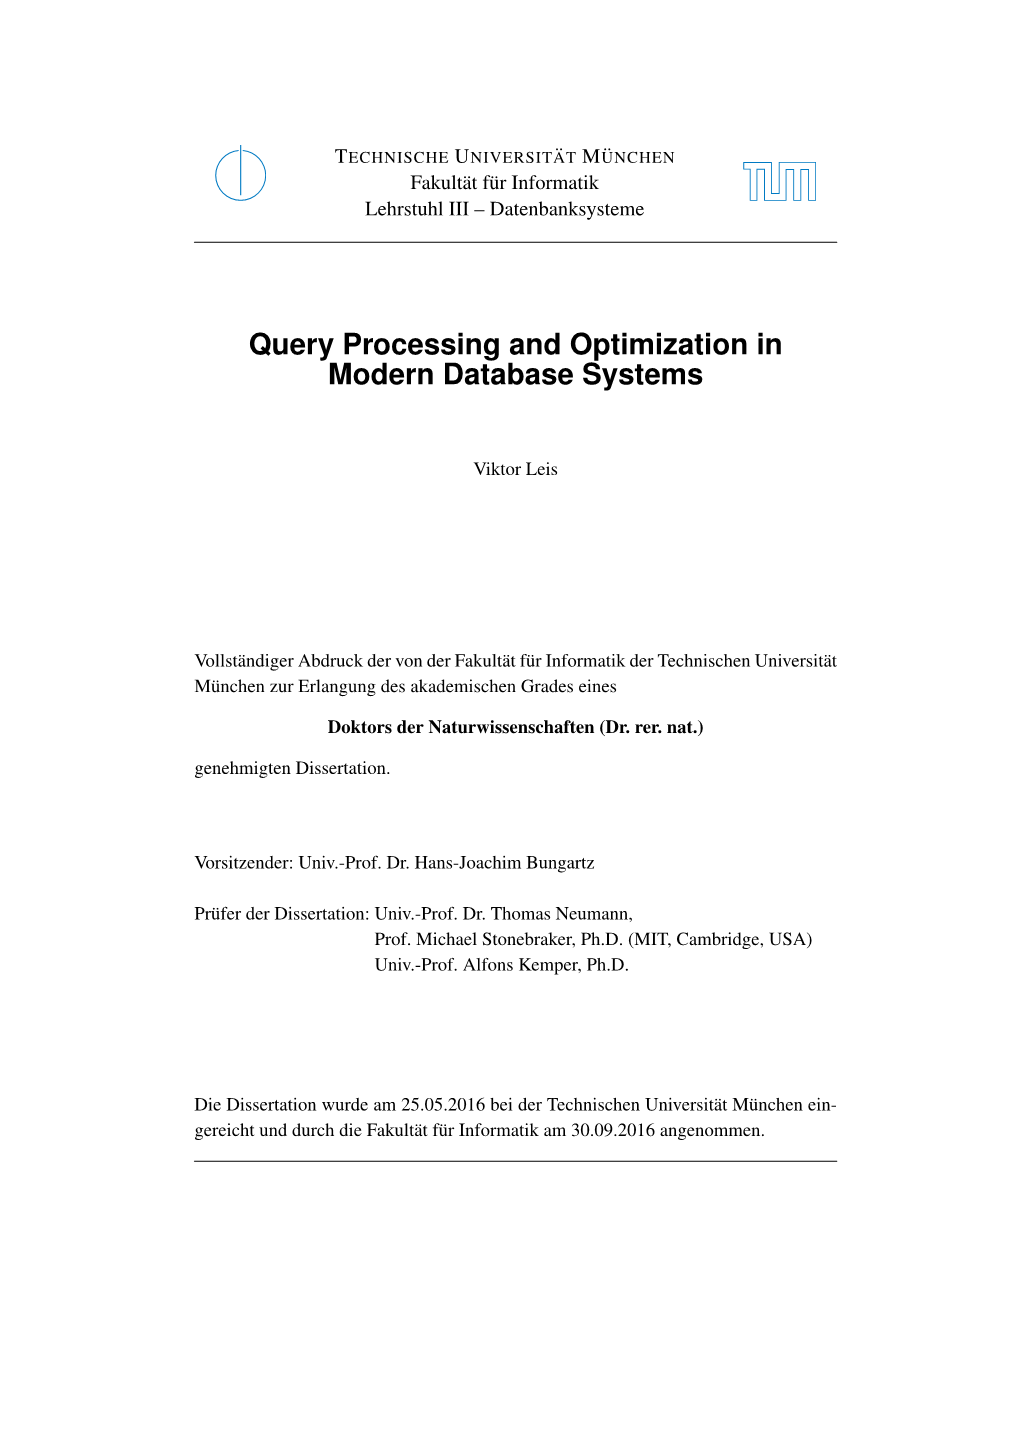 Query Processing and Optimization in Modern Database Systems